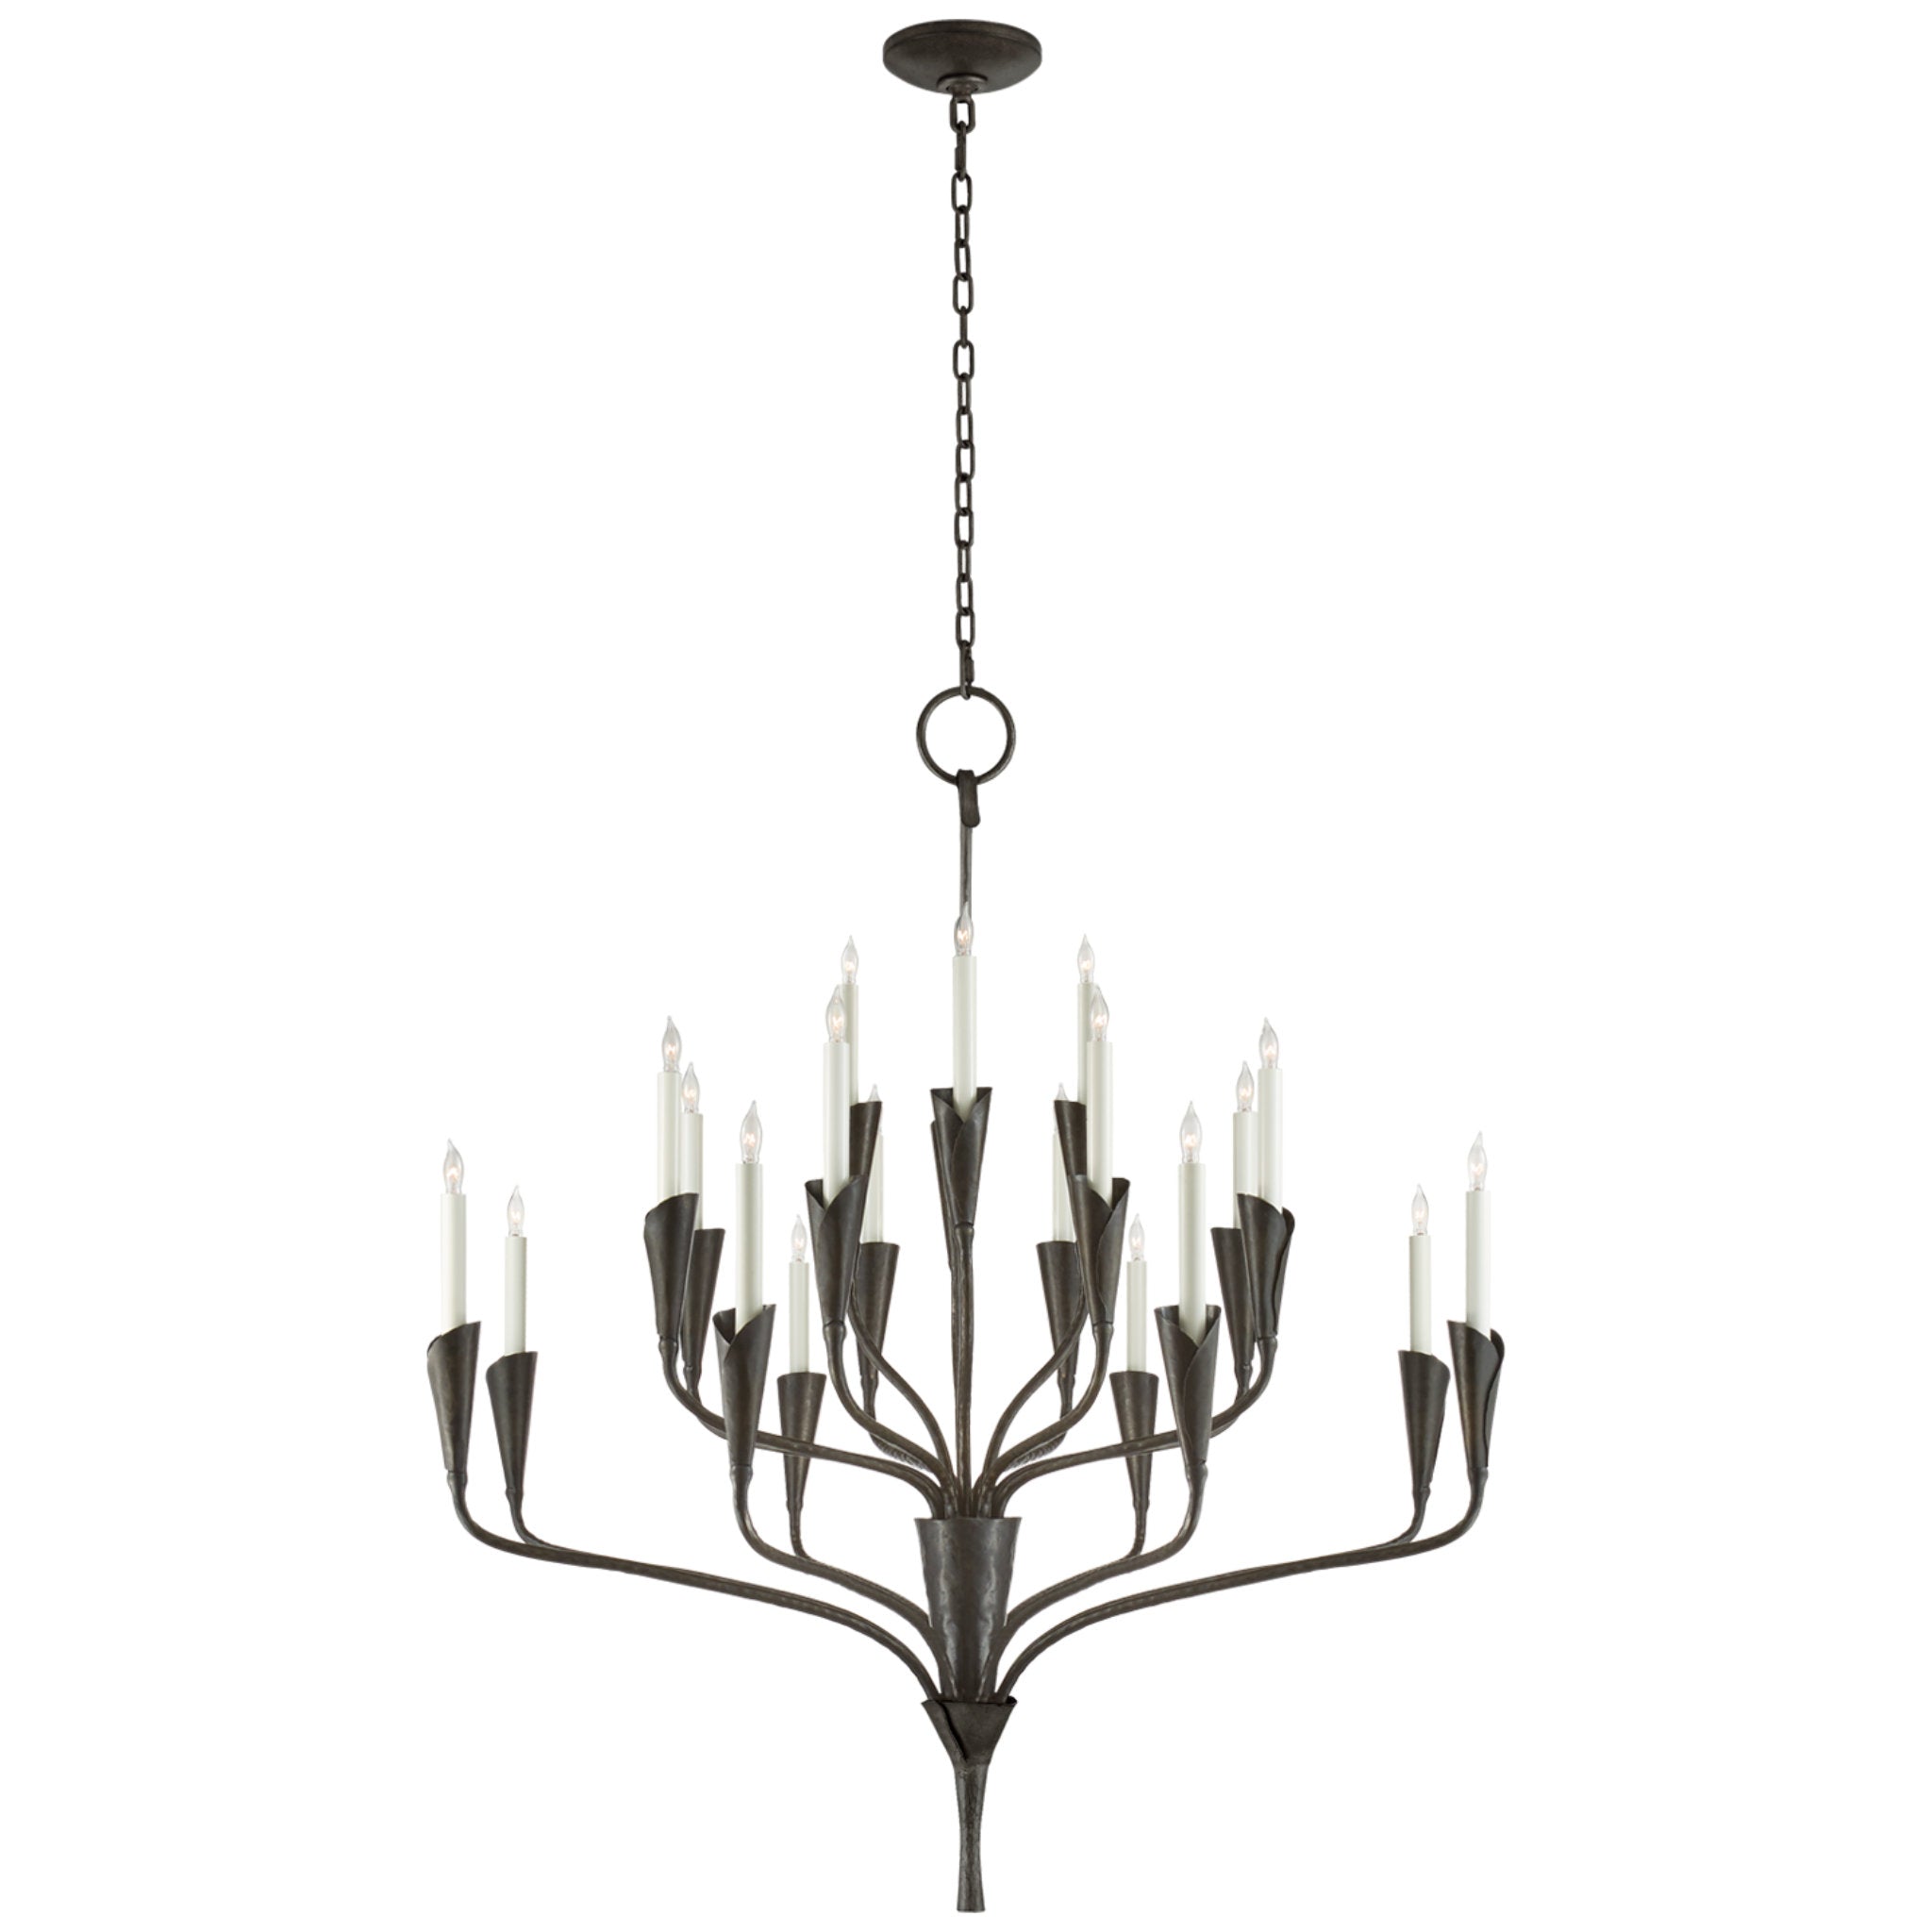 Chapman & Myers Aiden Large Chandelier in Aged Iron